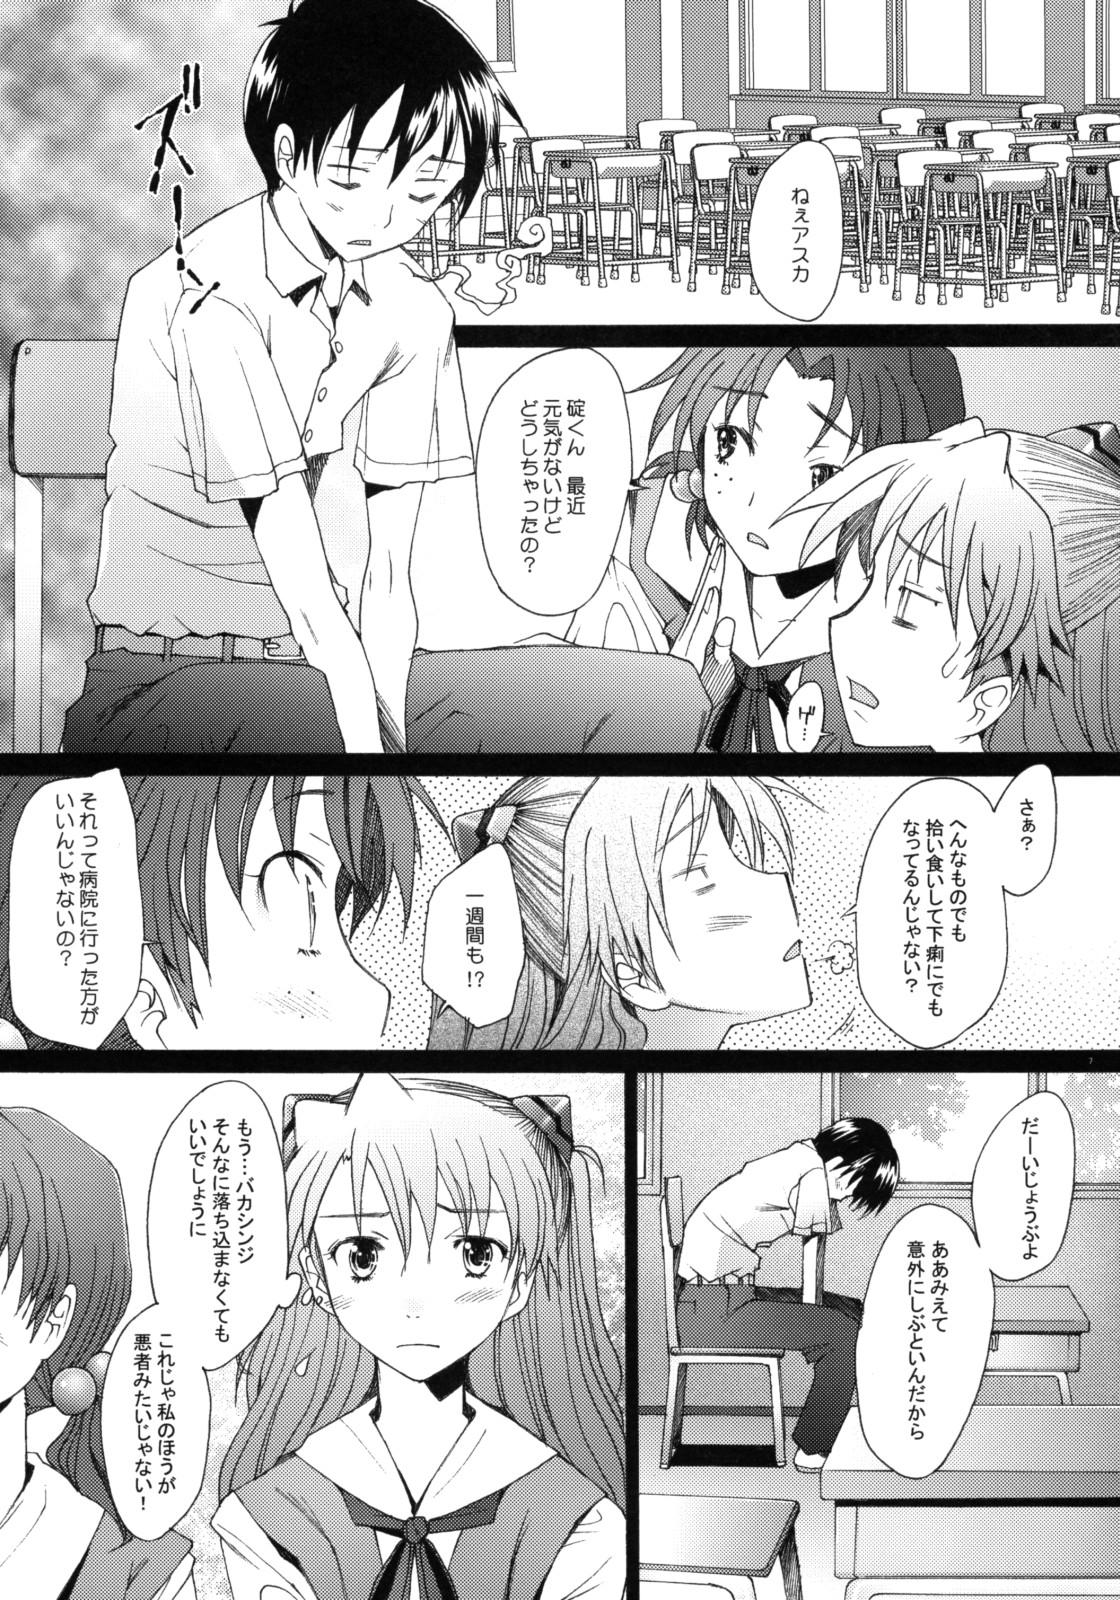 Tiny Confusion LEVEL A vol.2 - Neon genesis evangelion Gay College - Page 6